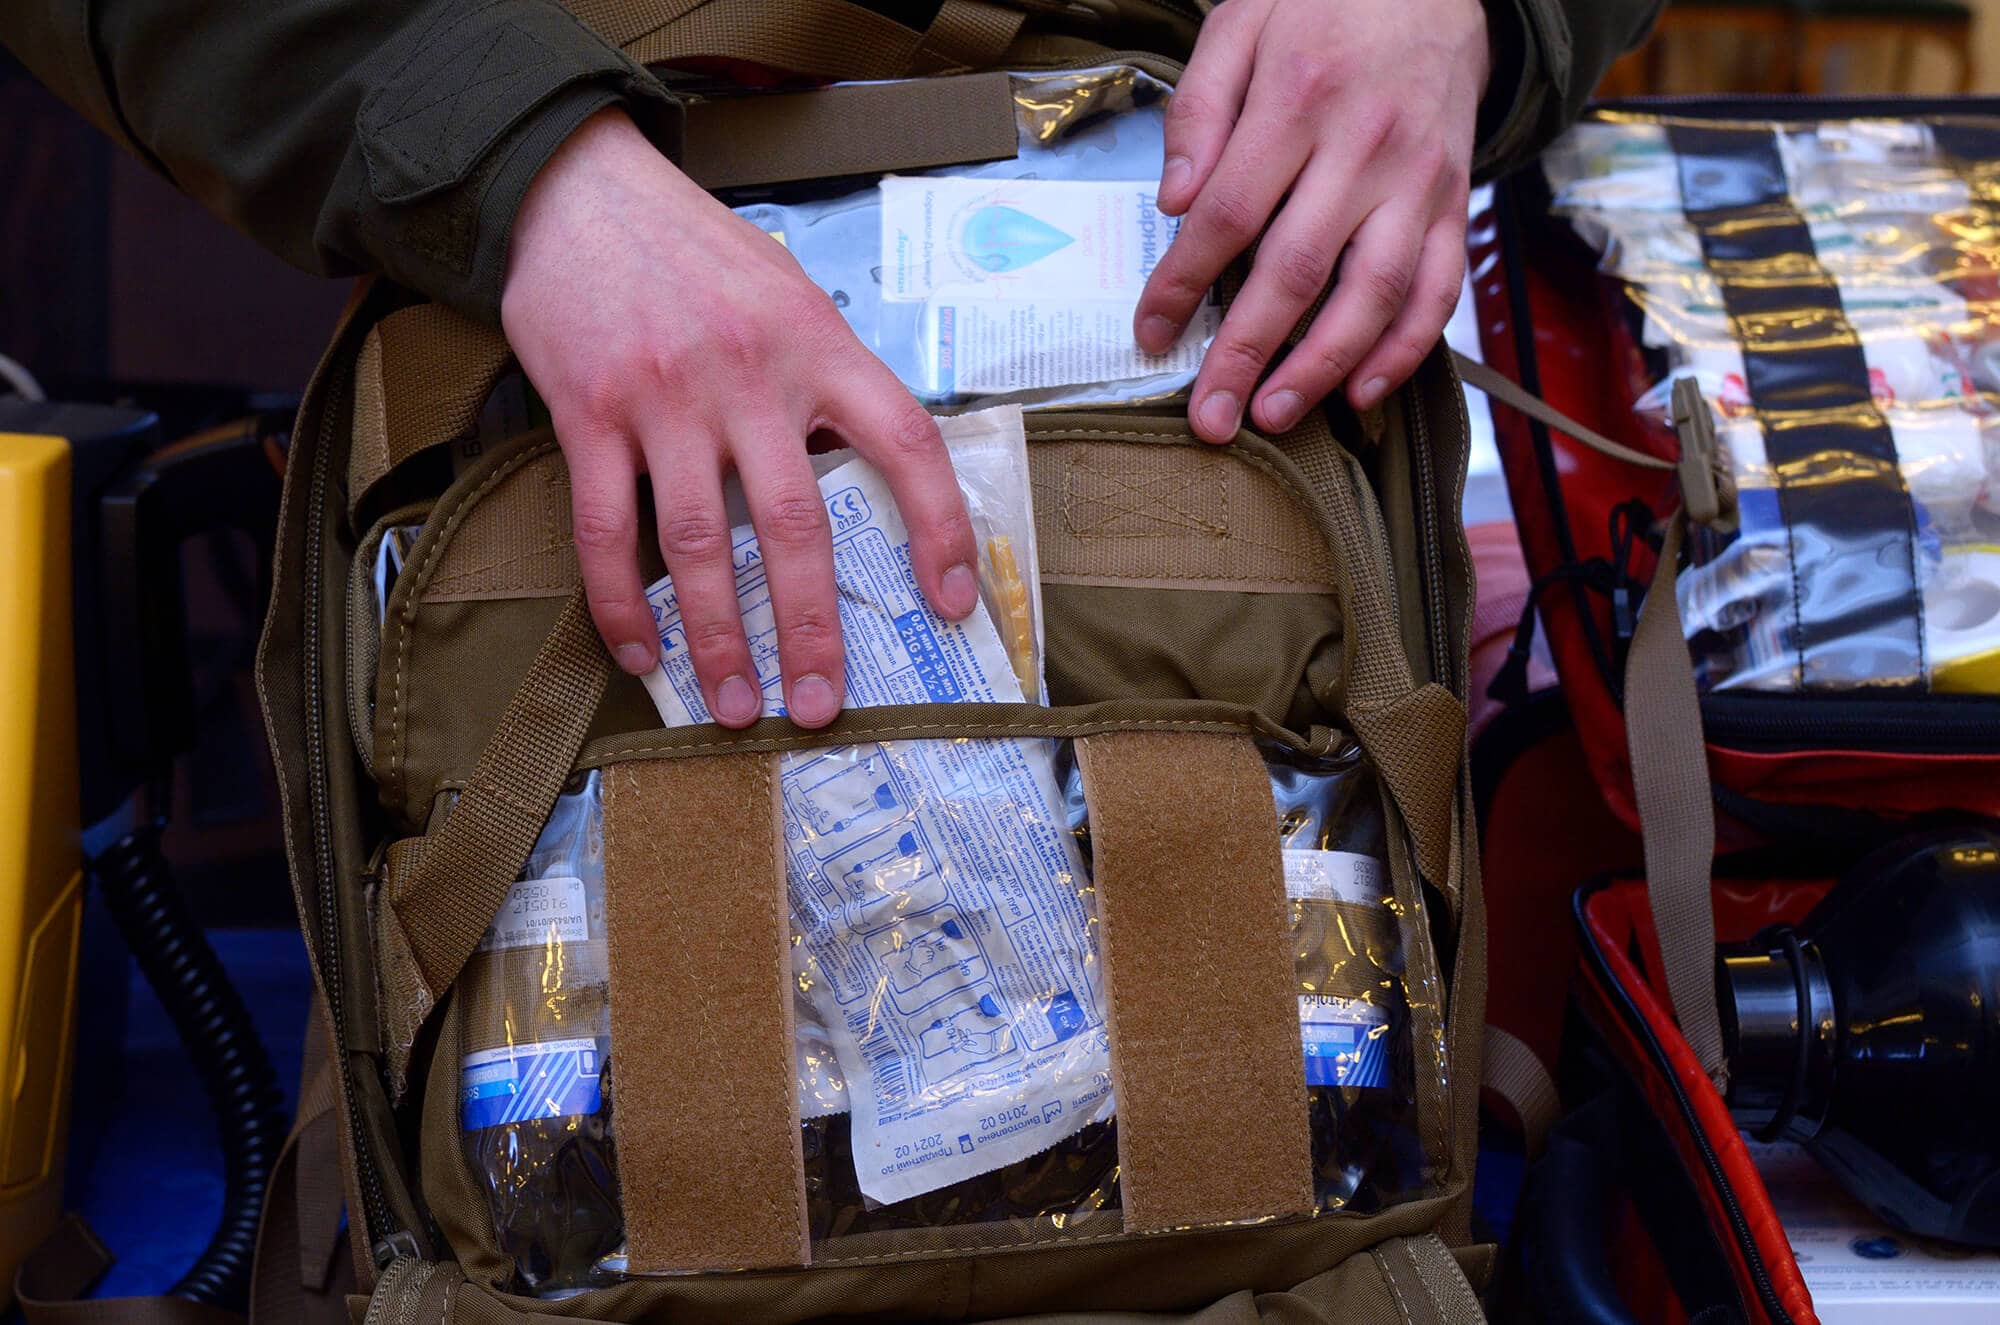 Medic packing backpack with supplies with lots of pockets